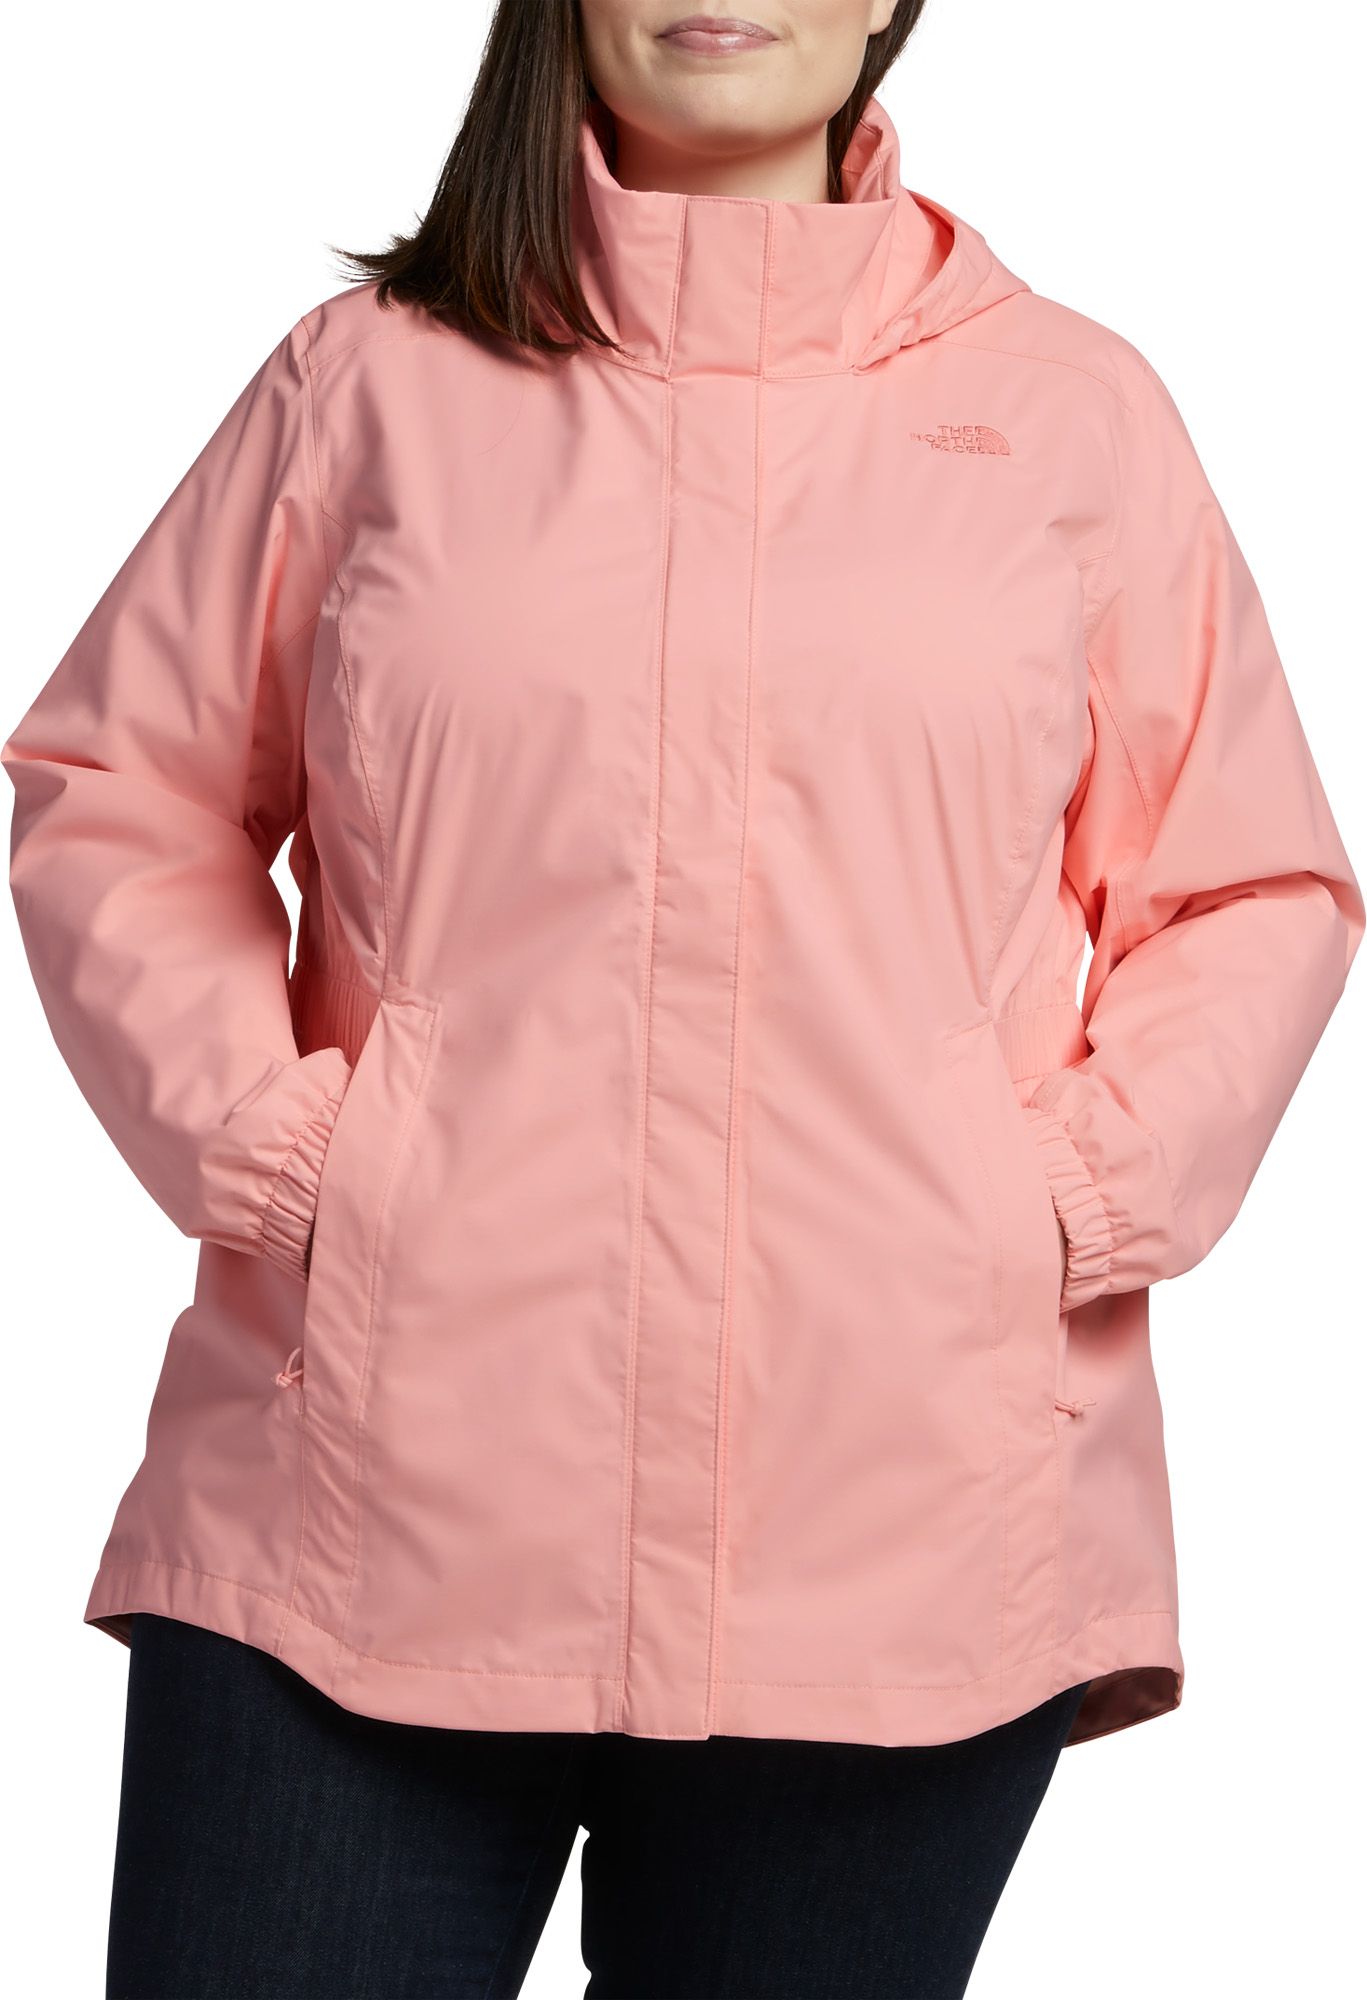 north face plus size jackets